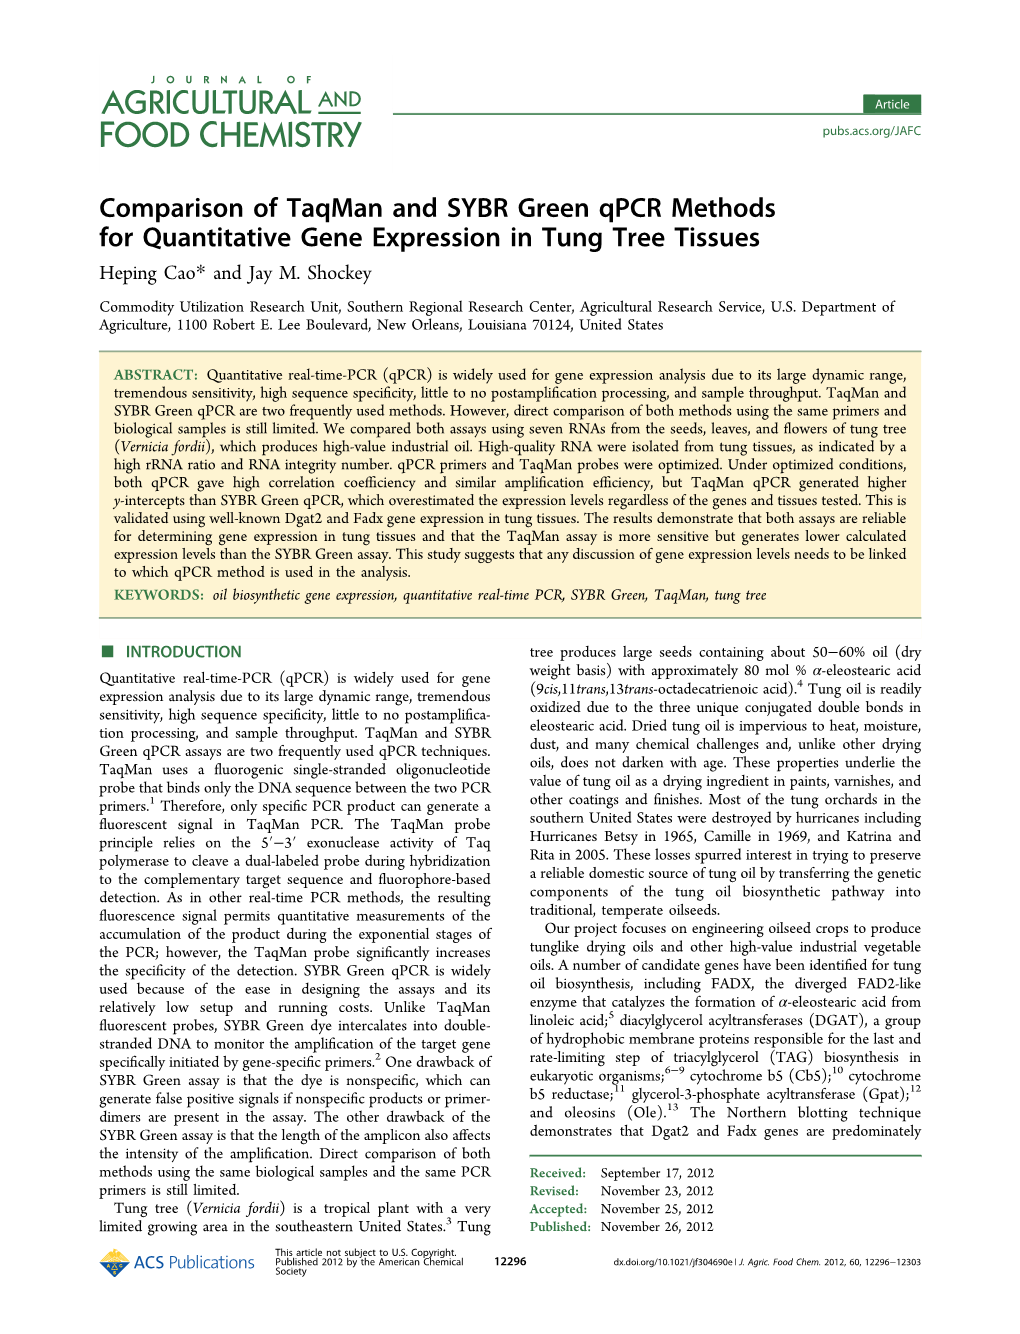 Comparison of Taqman and SYBR Green Qpcr Methods for Quantitative Gene Expression in Tung Tree Tissues Heping Cao* and Jay M